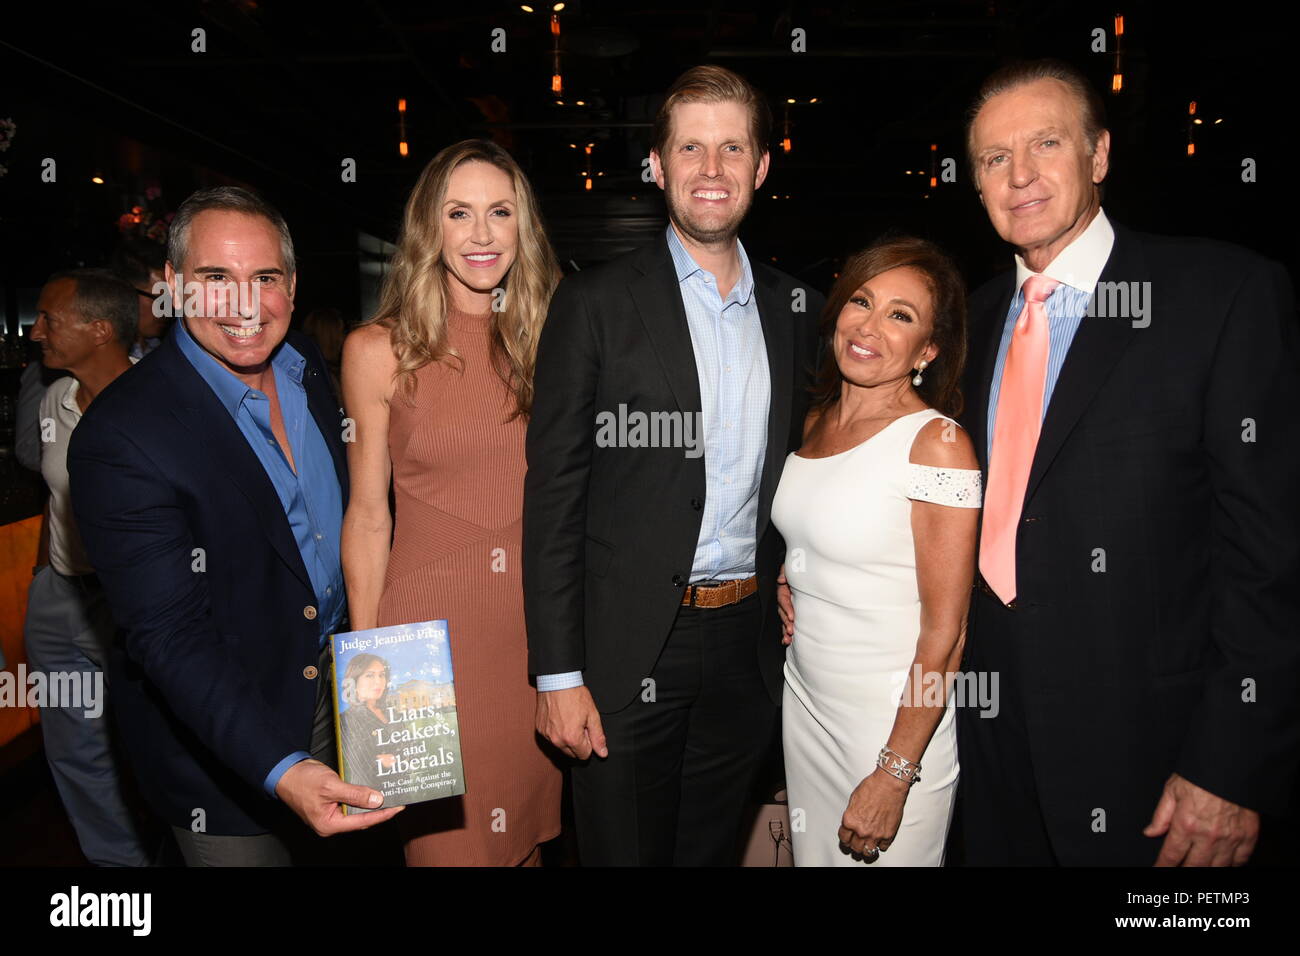 Eric Trump and wife Lara attend Judge Jeannine Pirro's book signing in NYC  Featuring: guest, Lara Trump, Eric Trump, Judge Jeanine Pirro, Anthony Where: Manhattan, New York, United States When: 16 Jul 2018 Credit: Rob Rich/WENN.com Stock Photo